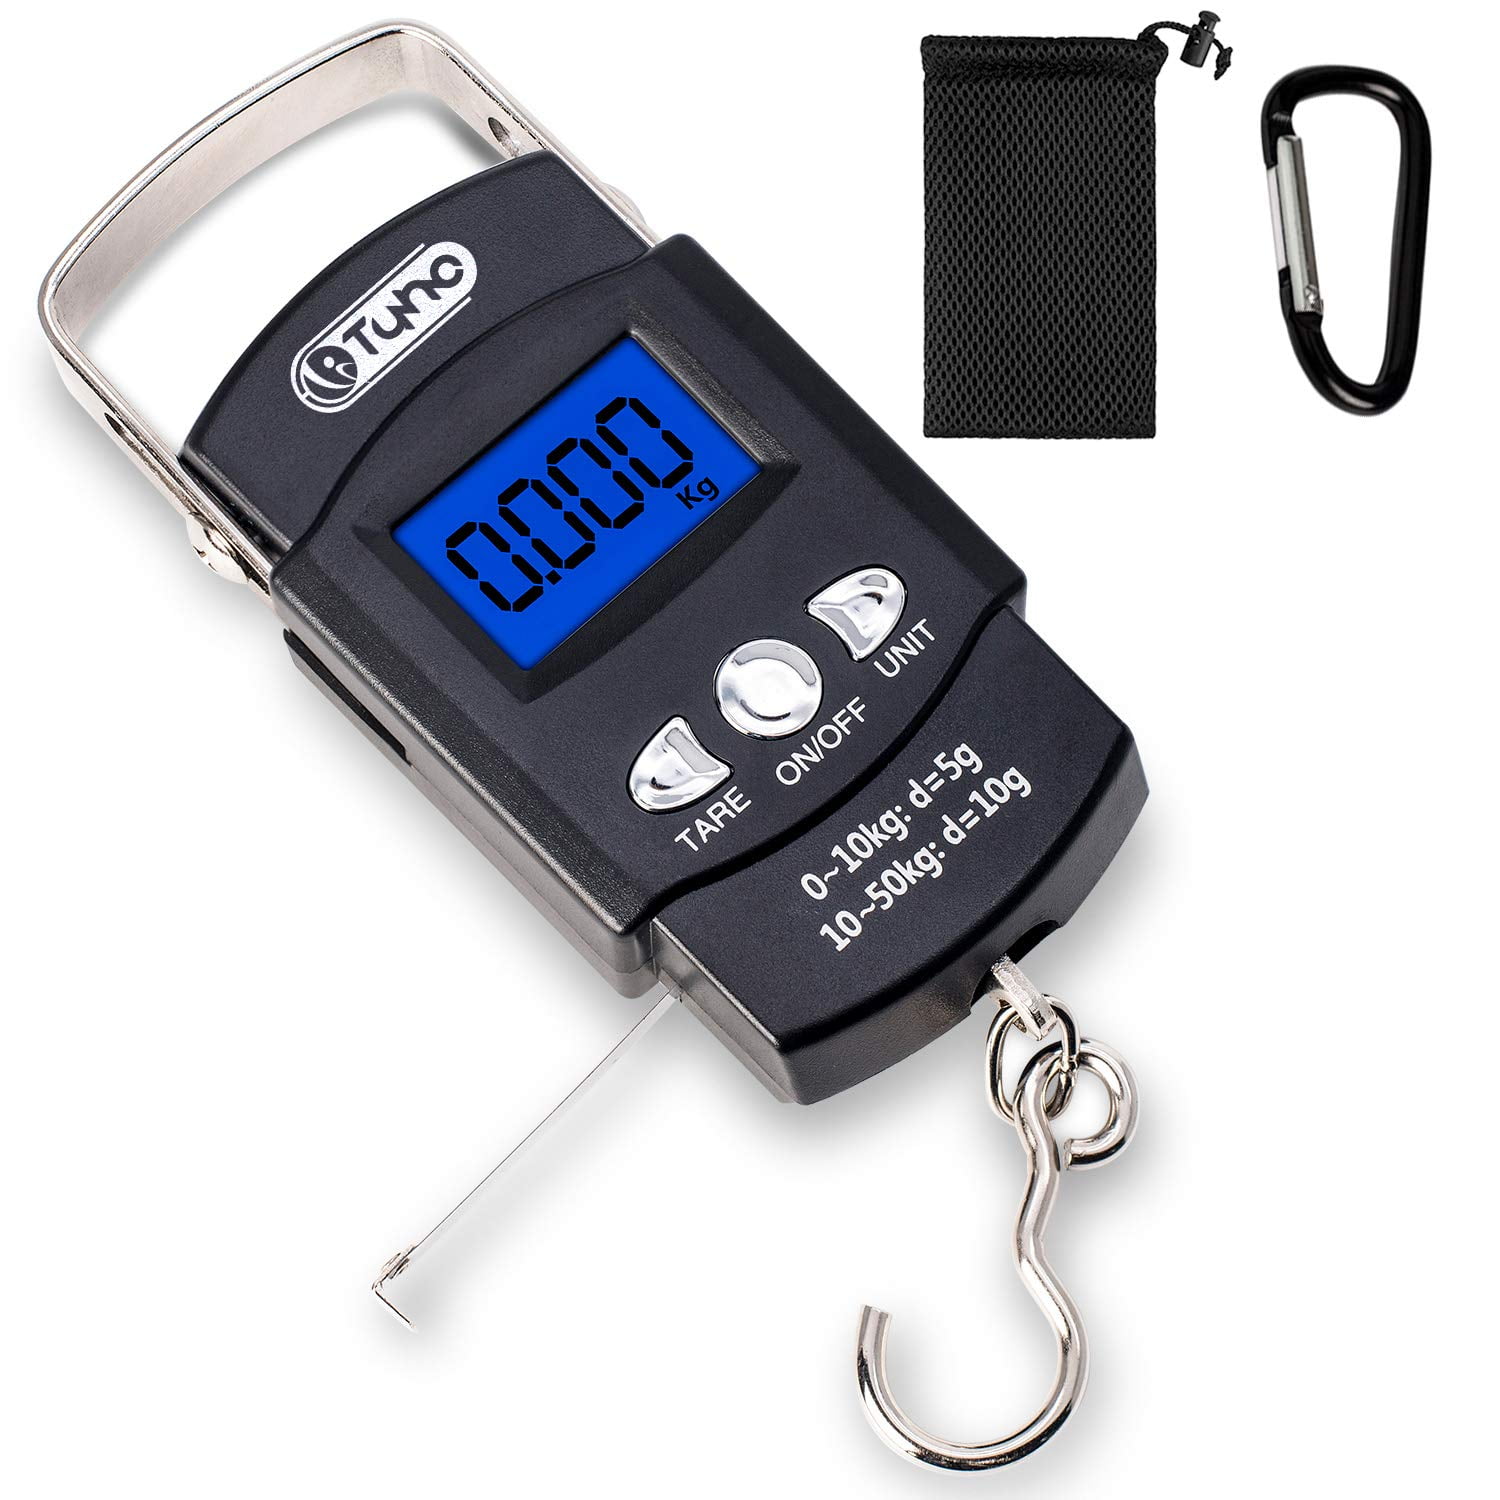 TyhoTech Fishing Scale 110lb/50kg Backlit LCD Screen Portable Electronic  Balance Digital Fish Hook Hanging Scale with Measuring Tape Ruler, D Shape